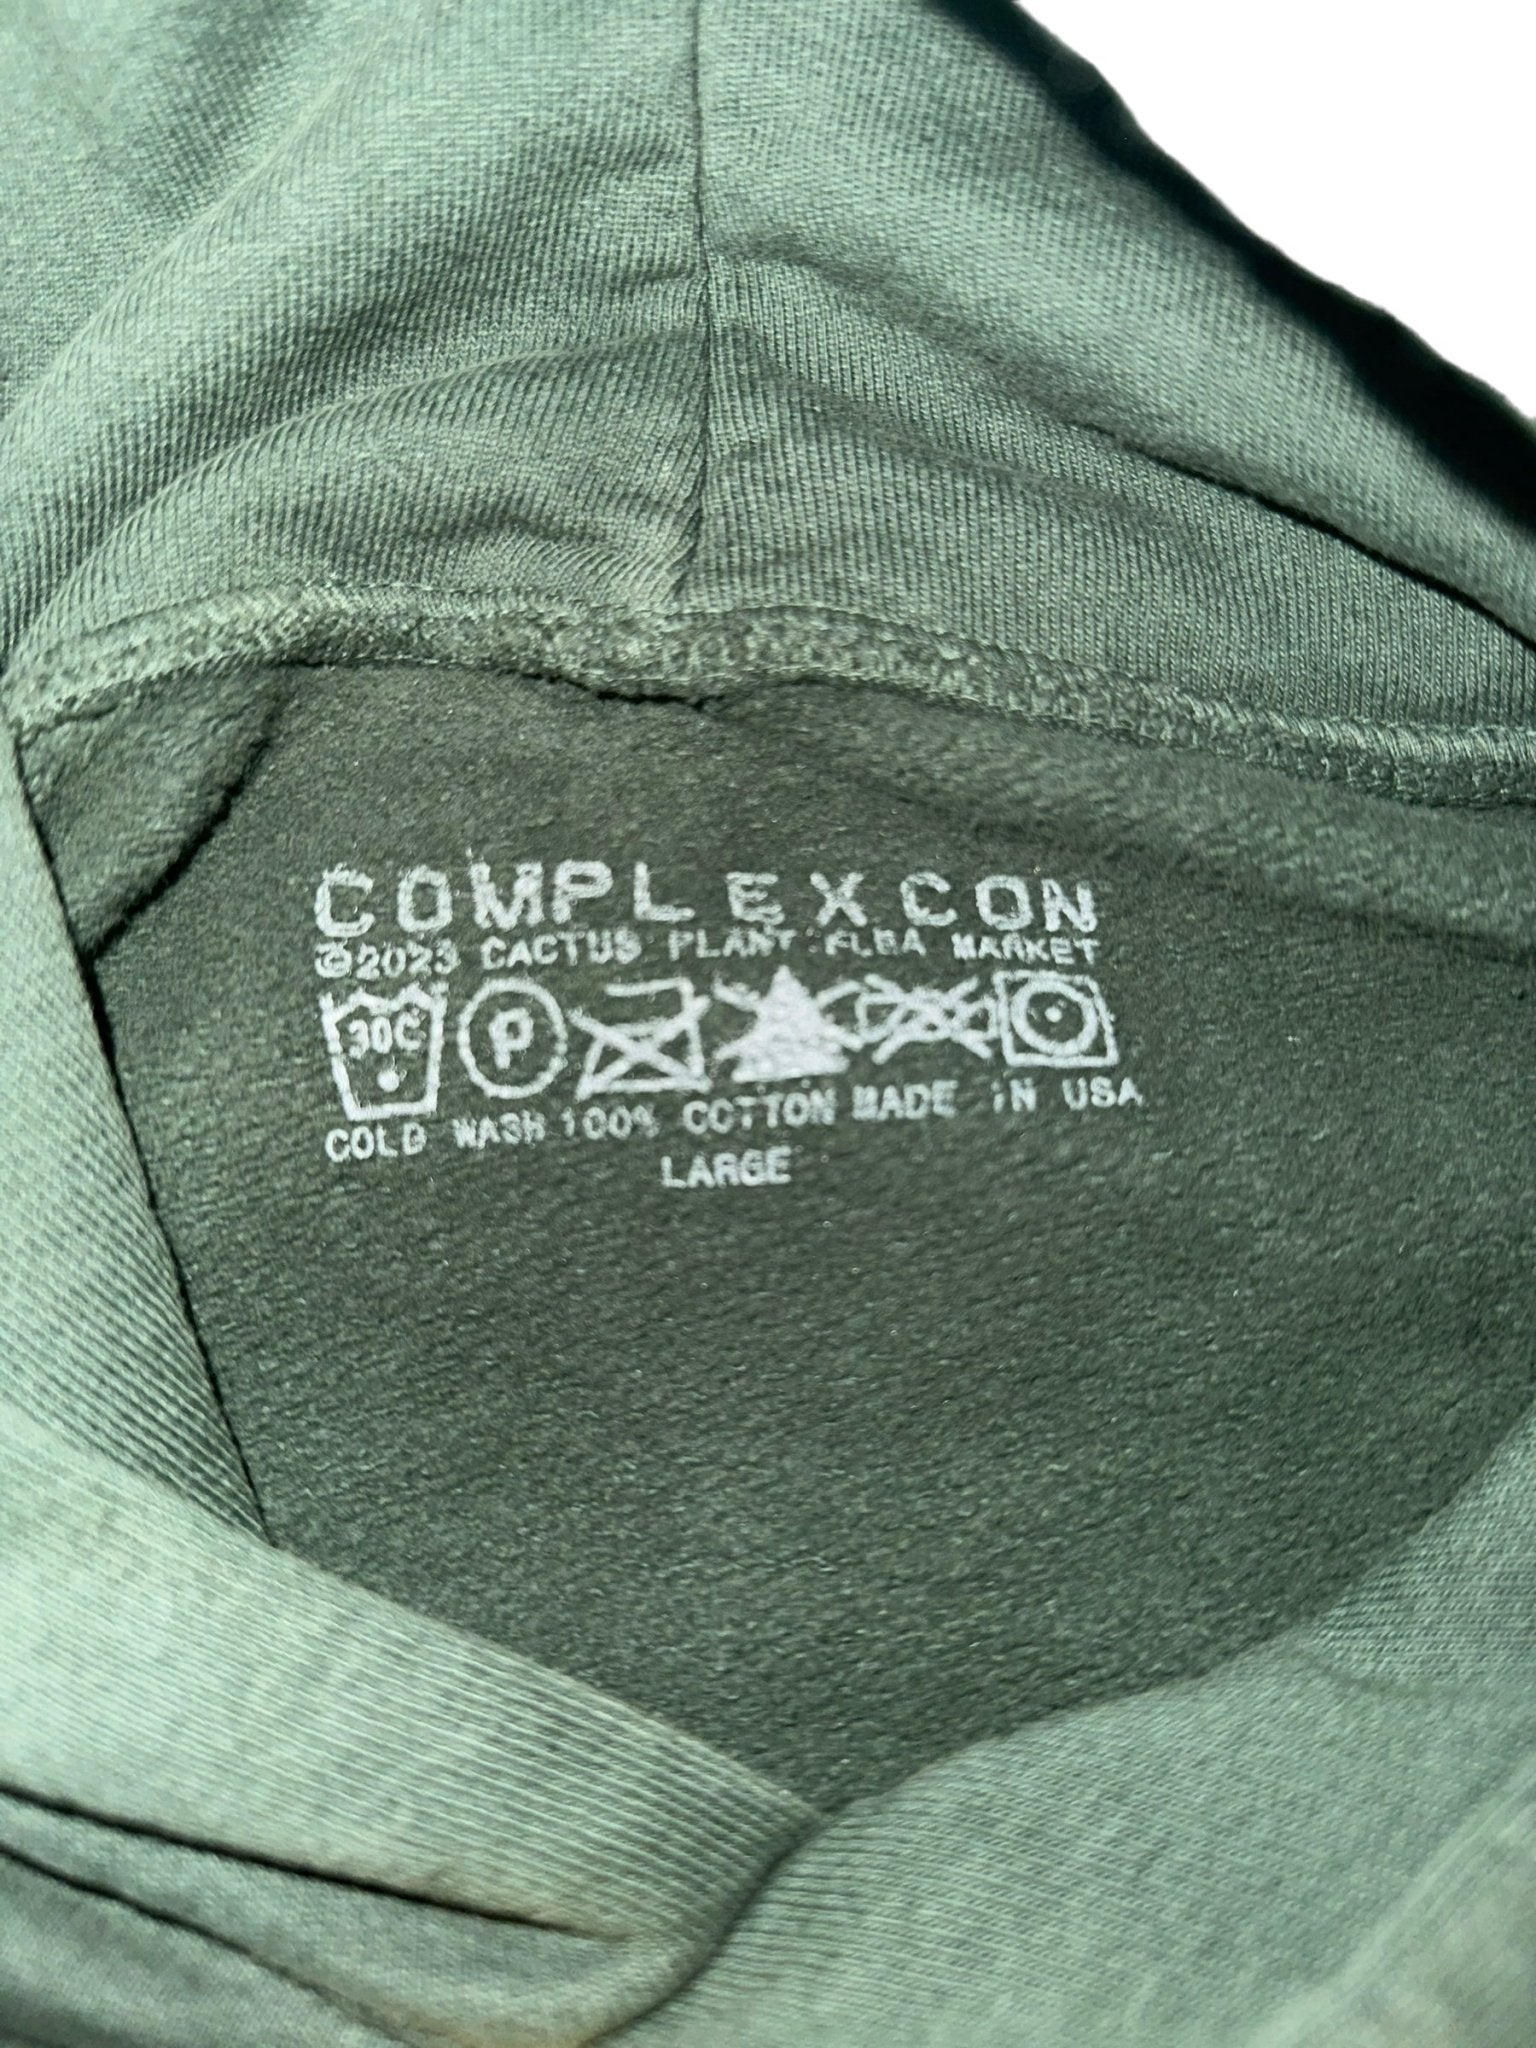 CPFM x ComplexCon Smiley Spider Legs Hoodie Green - Supra Sneakers